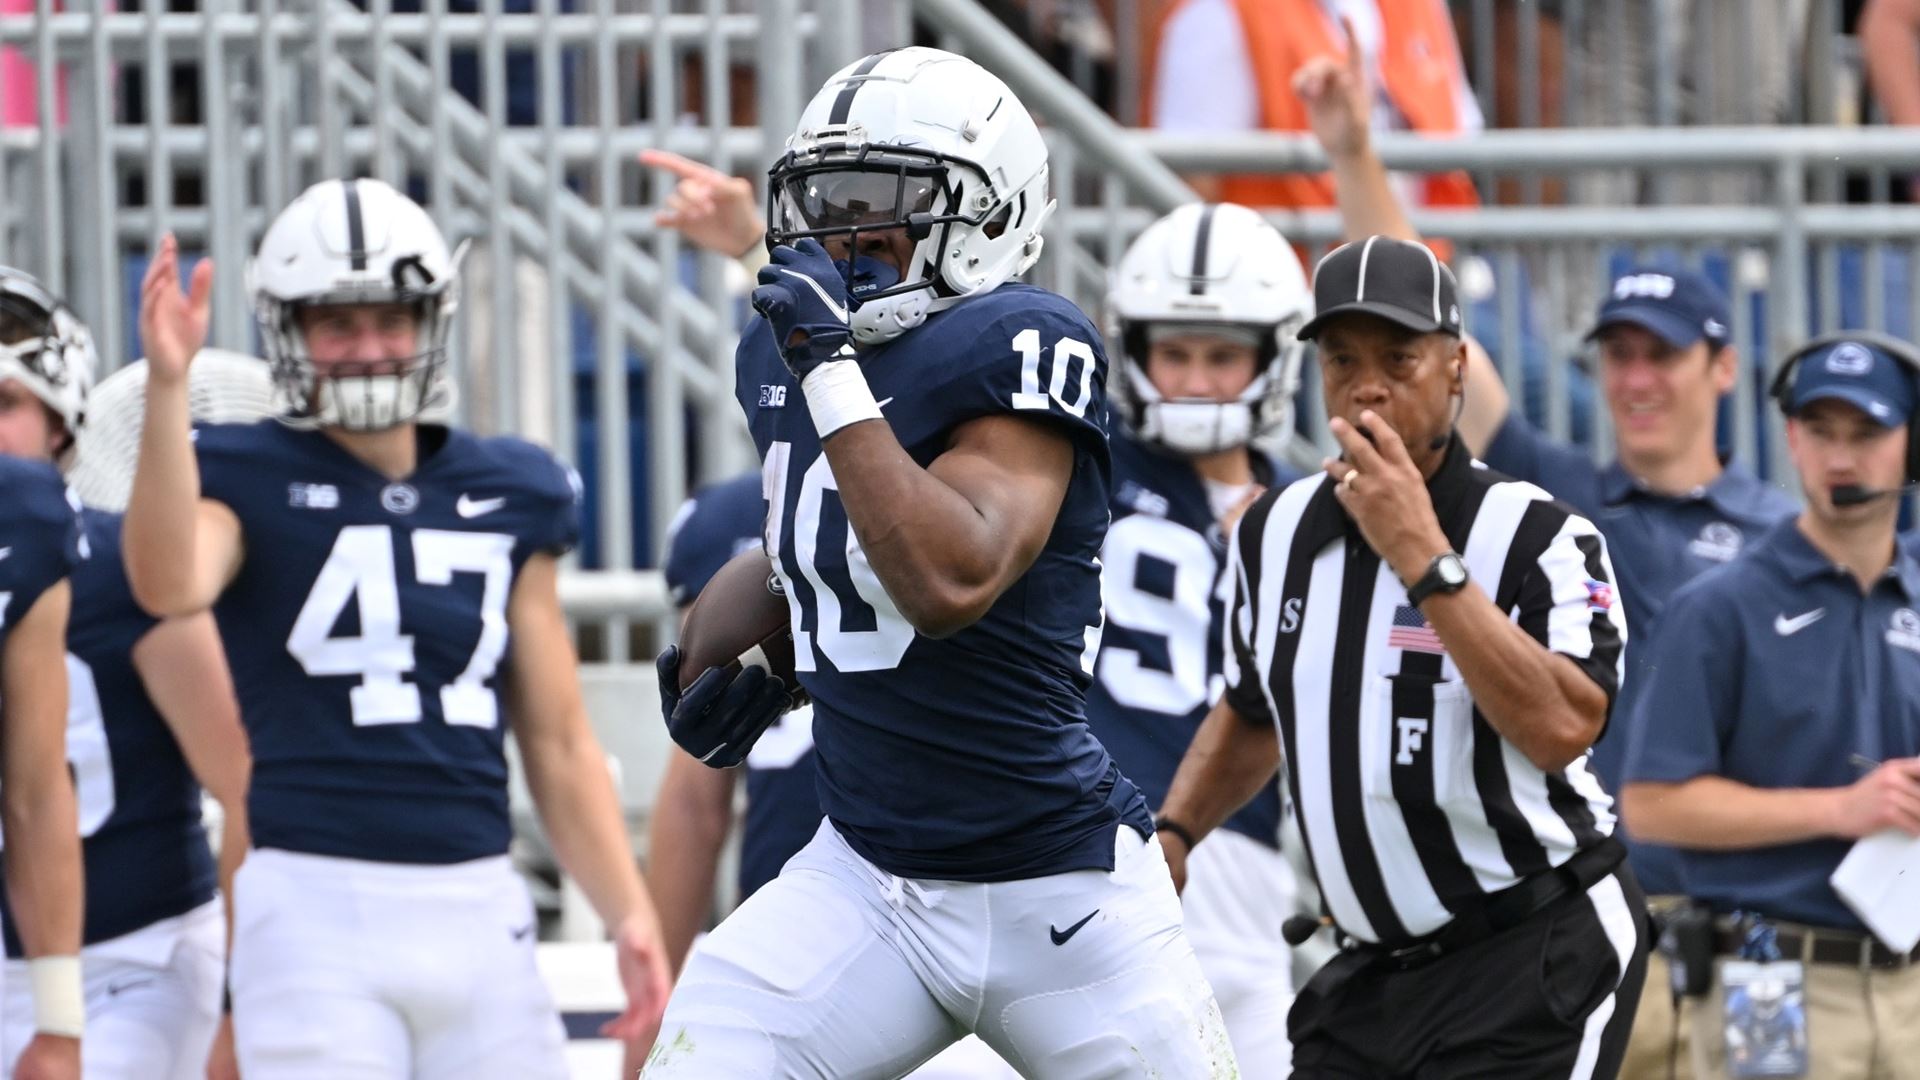 Nittany Lions Roar in Home Opening Blowout of Ohio